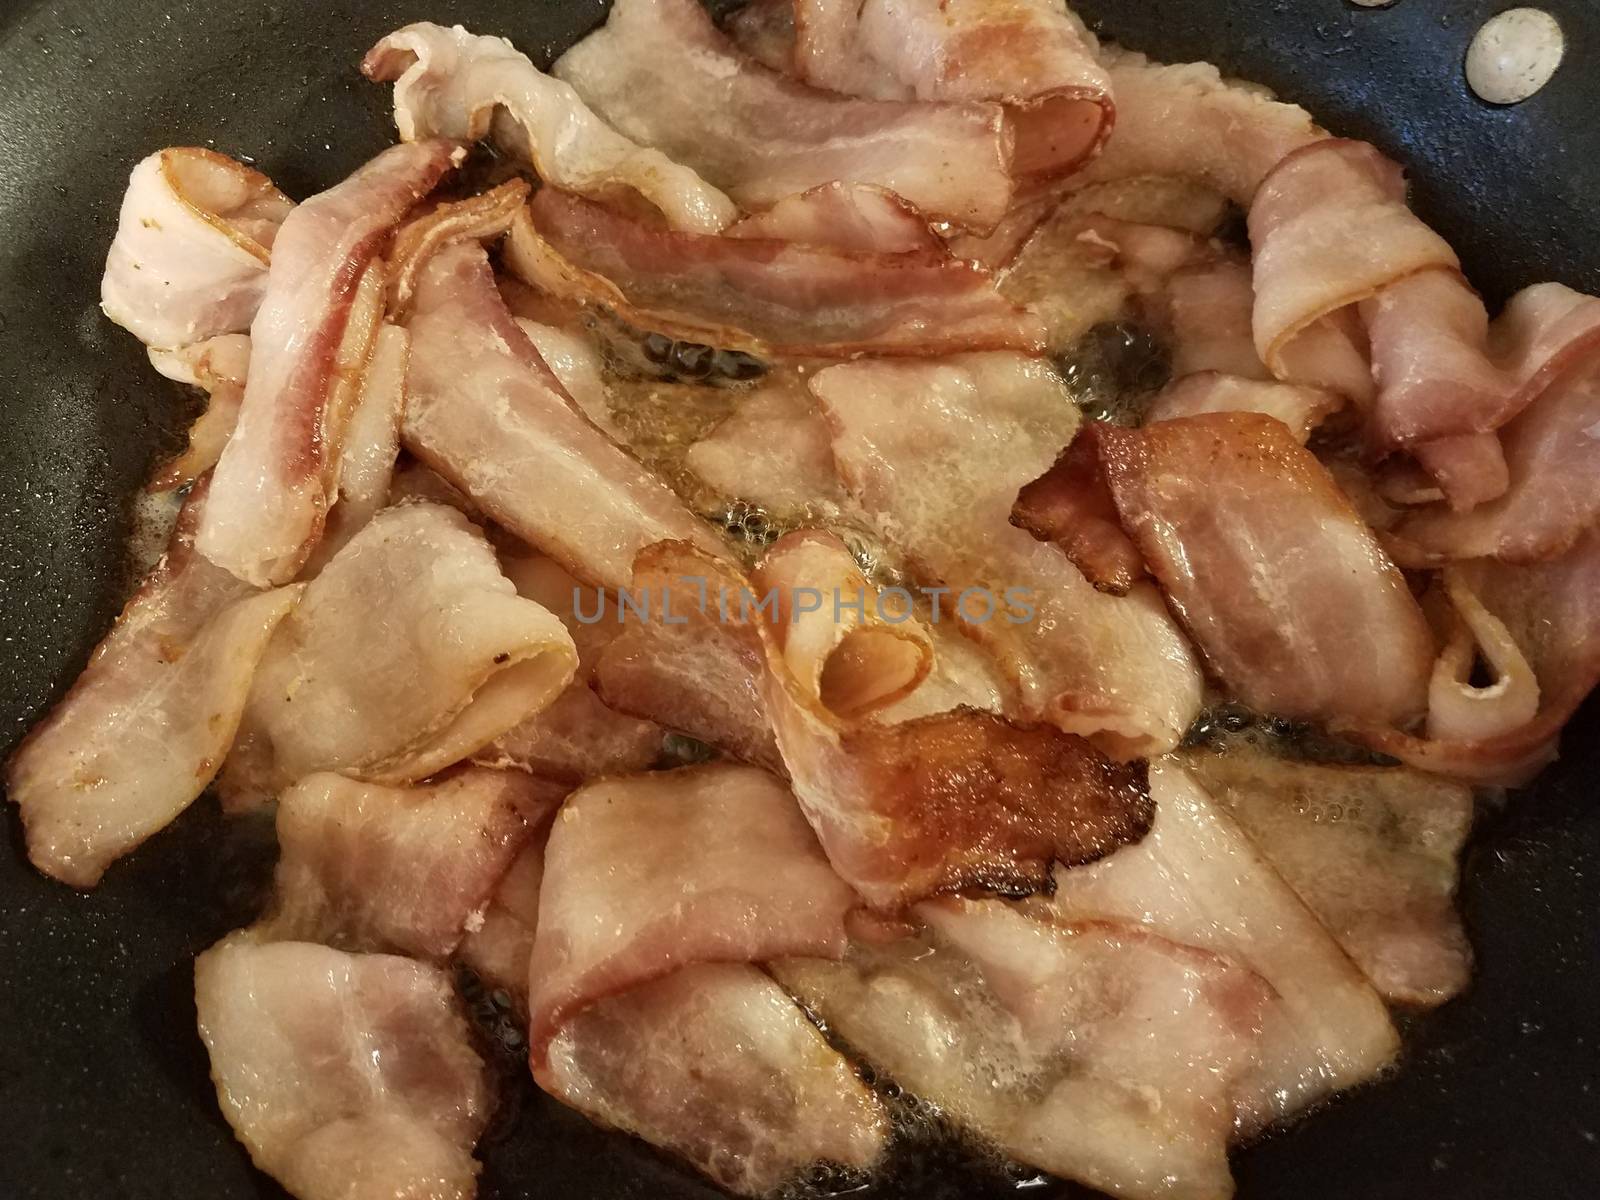 greasy bacon cooking in frying pan or skillet on stove